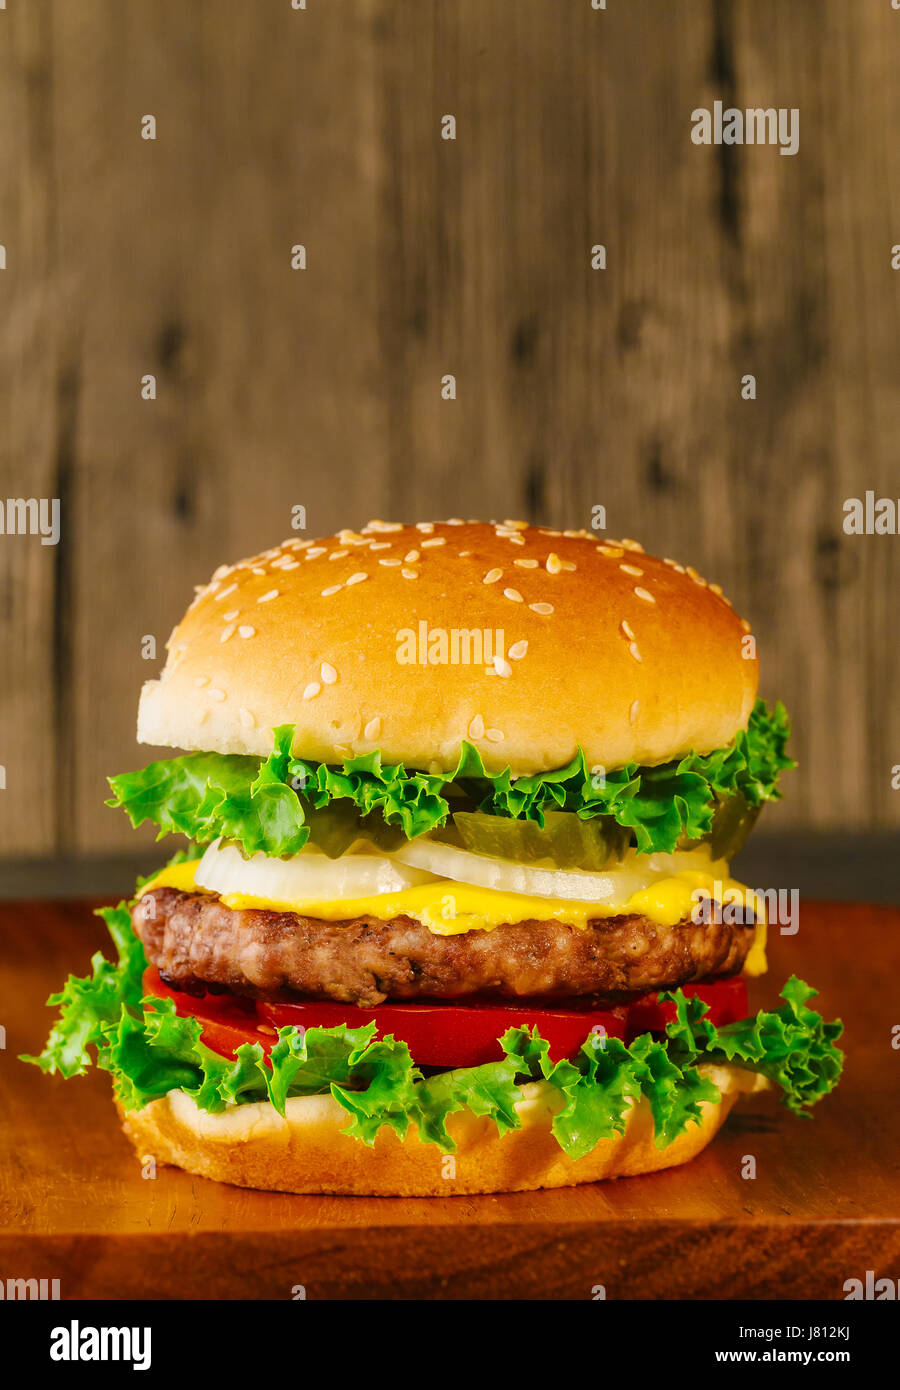 Classic deluxe cheeseburger with lettuce, onions, tomato and pickles on a sesame seed bun. Macro with shallow dof. Stock Photo